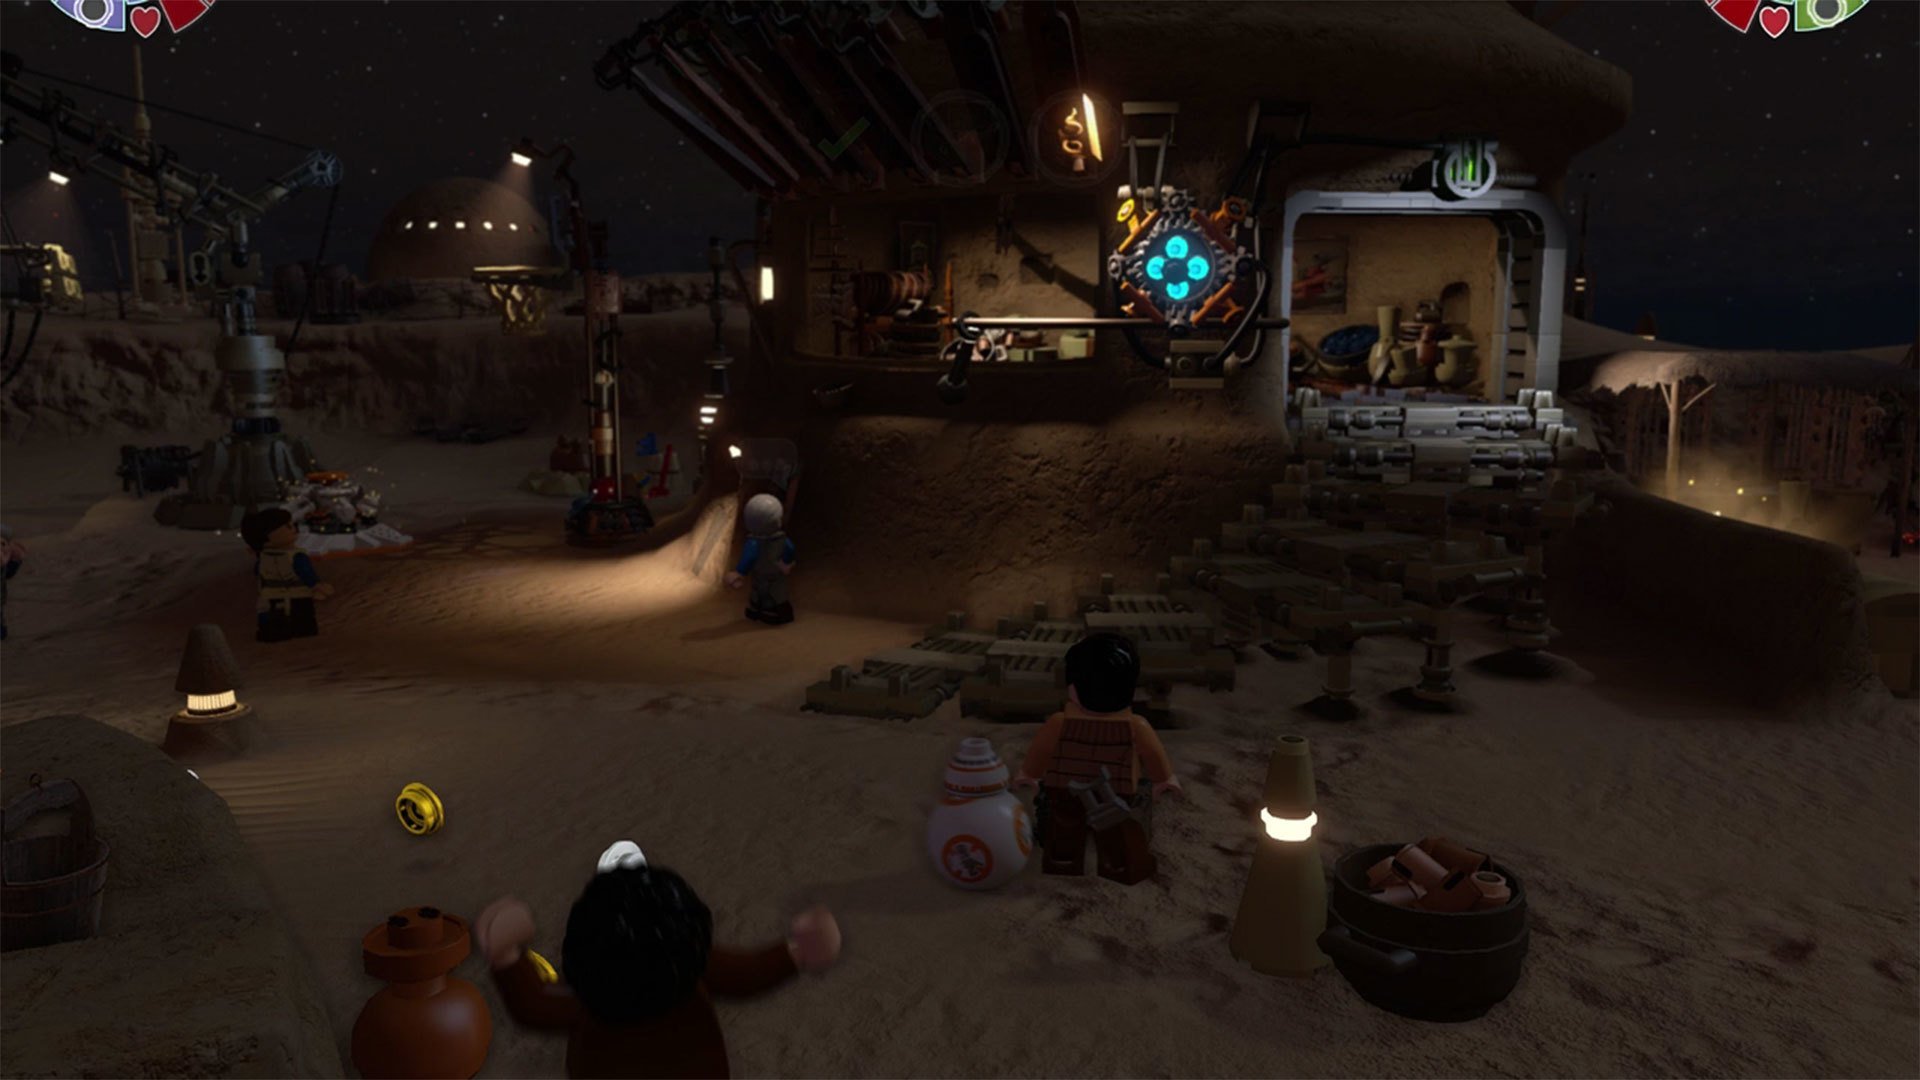 lego star wars the video game xbox one